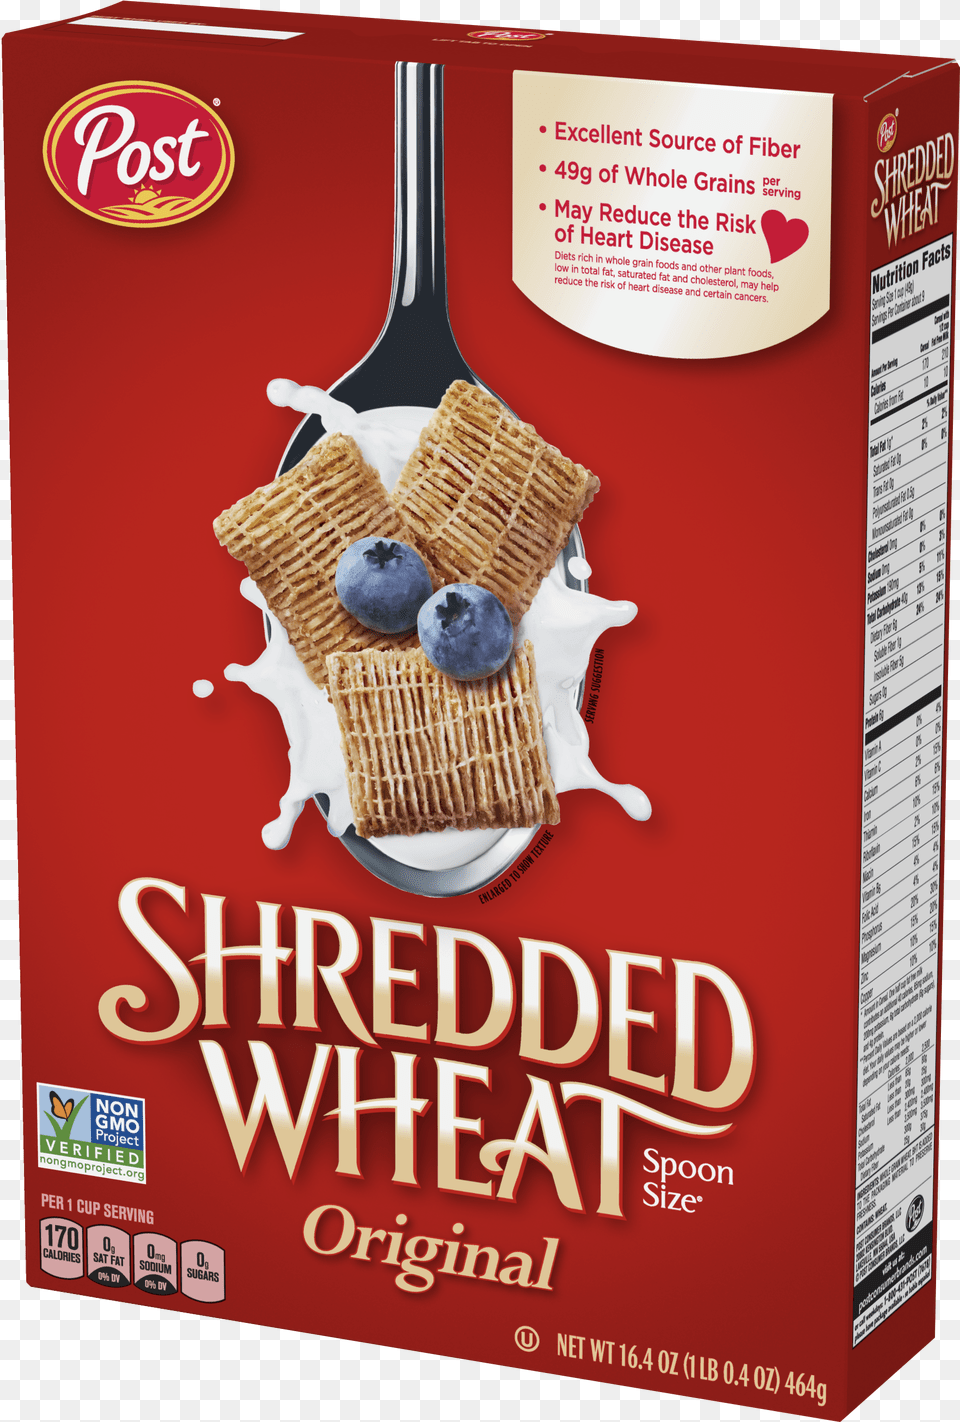 Post Shredded Wheat Original Spoon Size Cereal Box Shredded Wheat Cereal Post, Berry, Blueberry, Food, Fruit Free Transparent Png